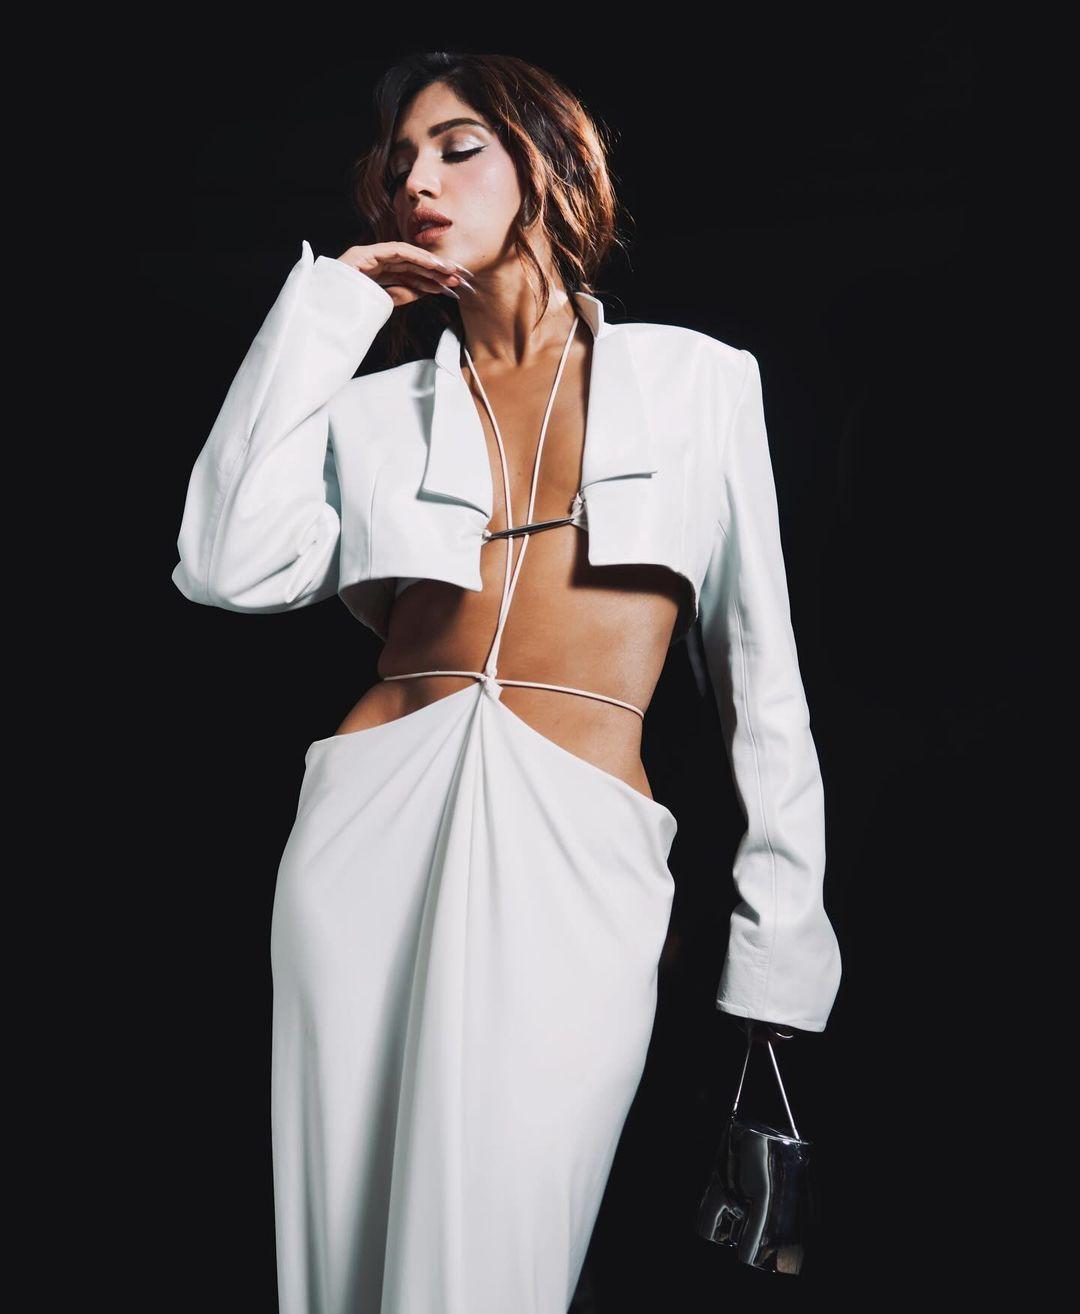 She was photographed wearing a white ensemble that included a bralette top with metallic piping, a long skirt with a back plate held together by strings, and an unbuttoned cropped blazer.